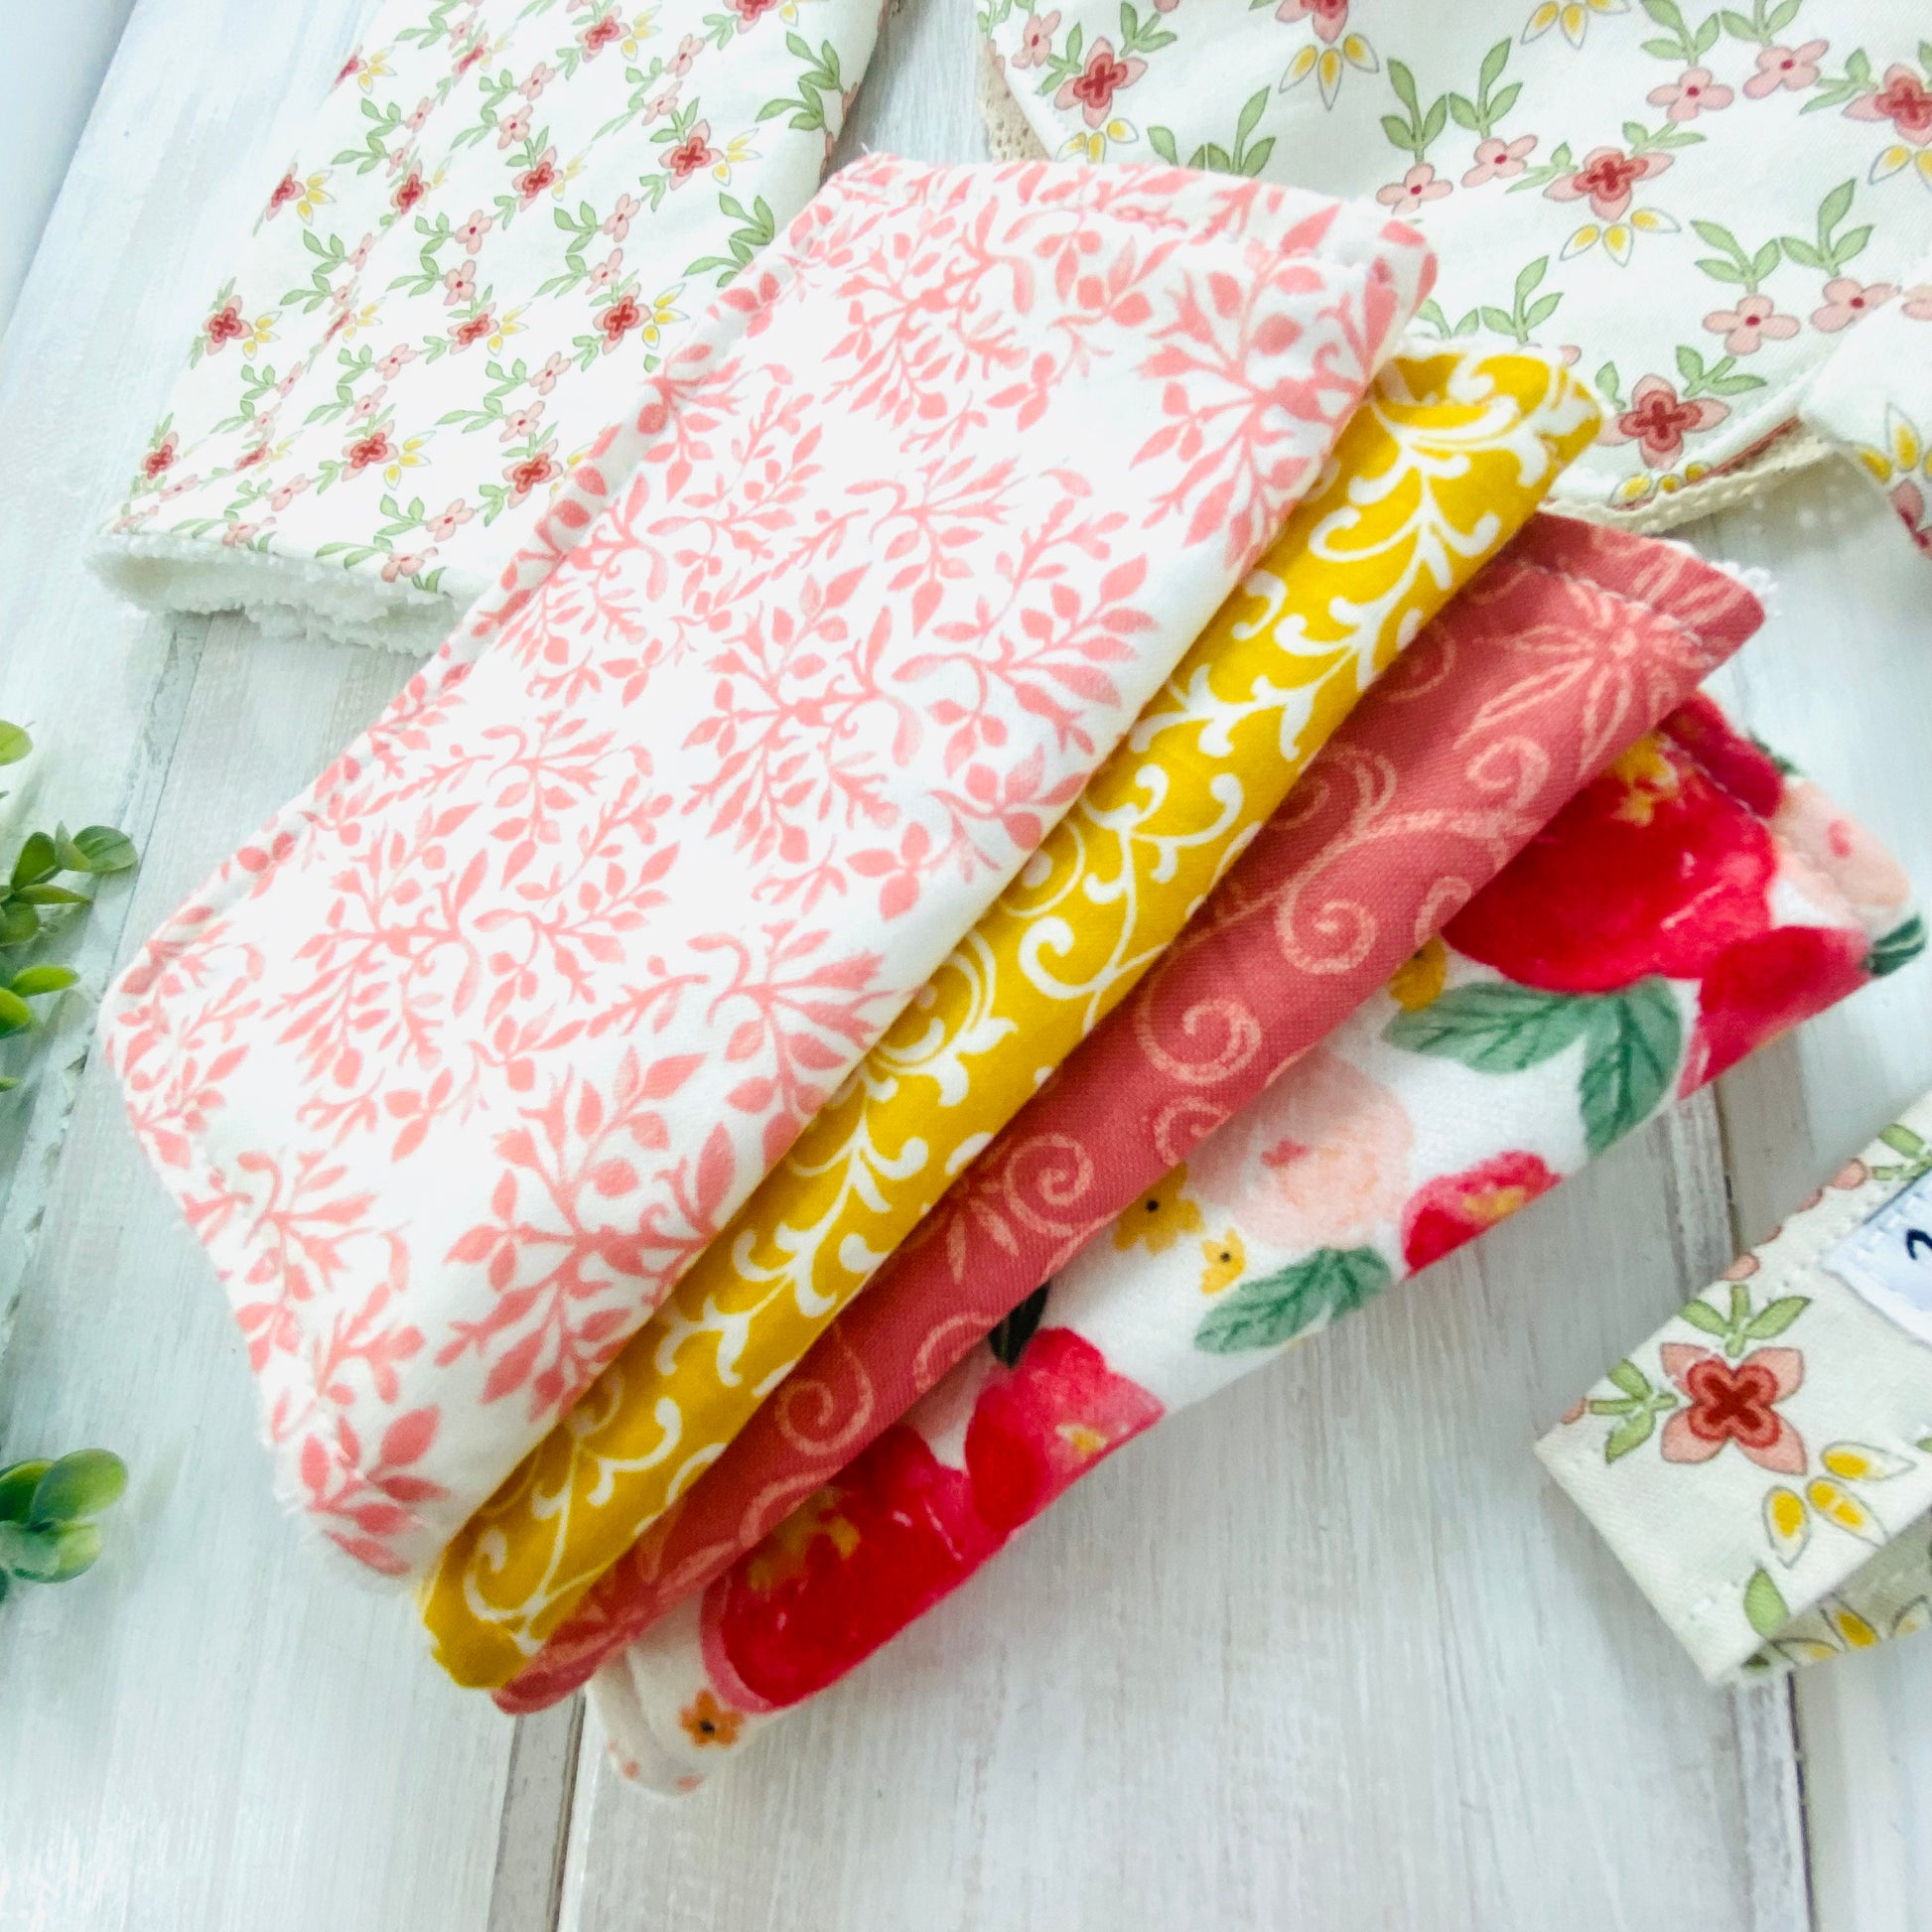 Set of 4 reusable baby wipes or baby washing cloths.